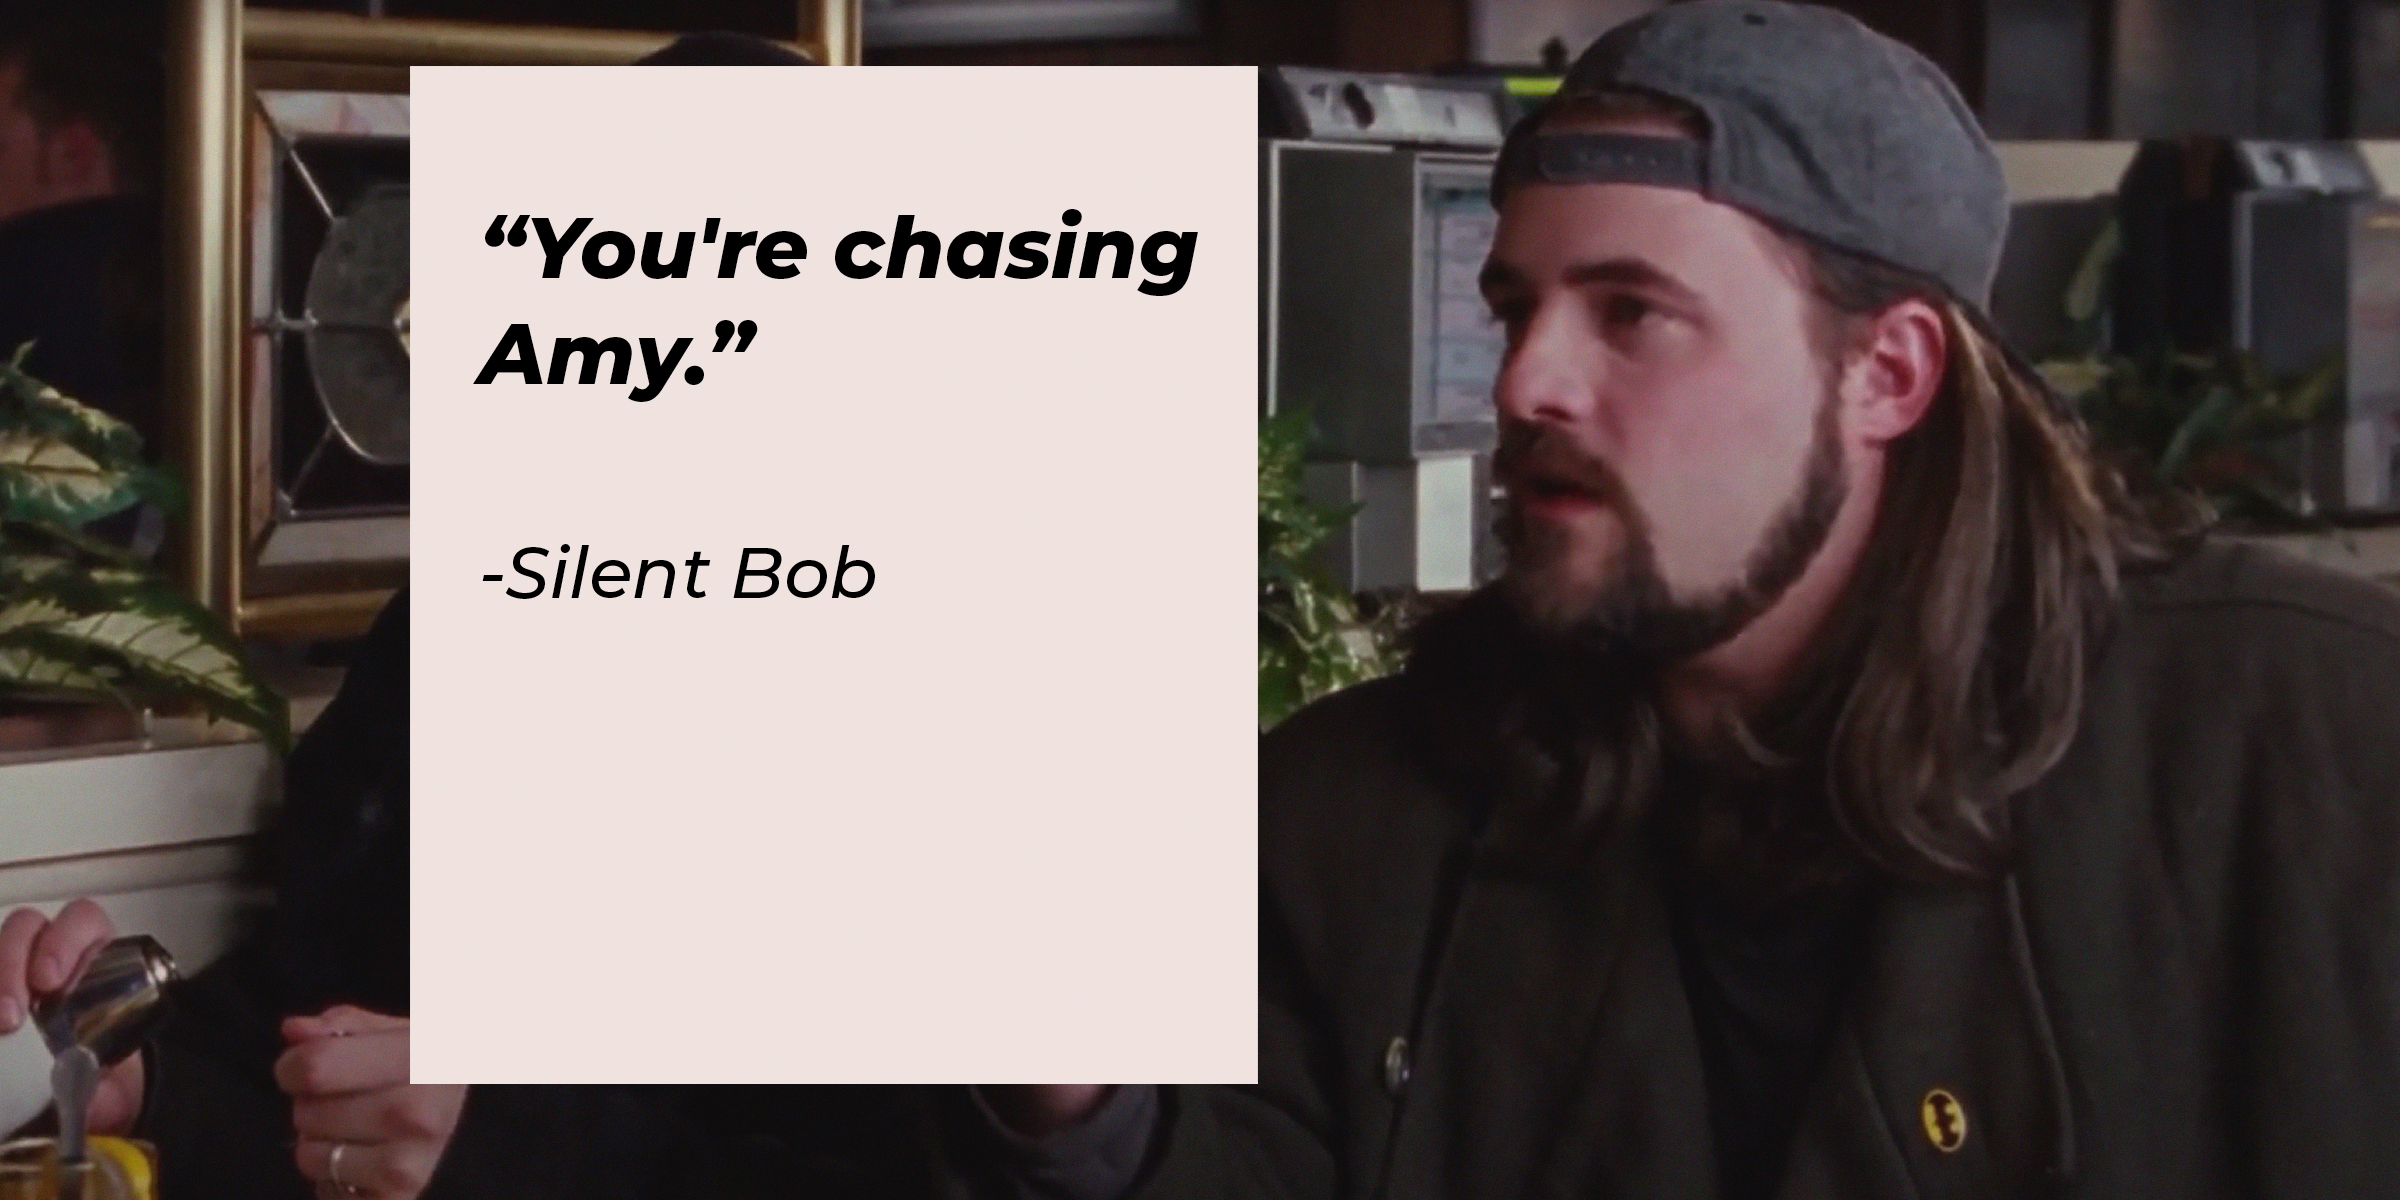 Silent Bob with his quote: “You’re chasing Amy.” | Source: facebook.com/ChasingAmyMovie